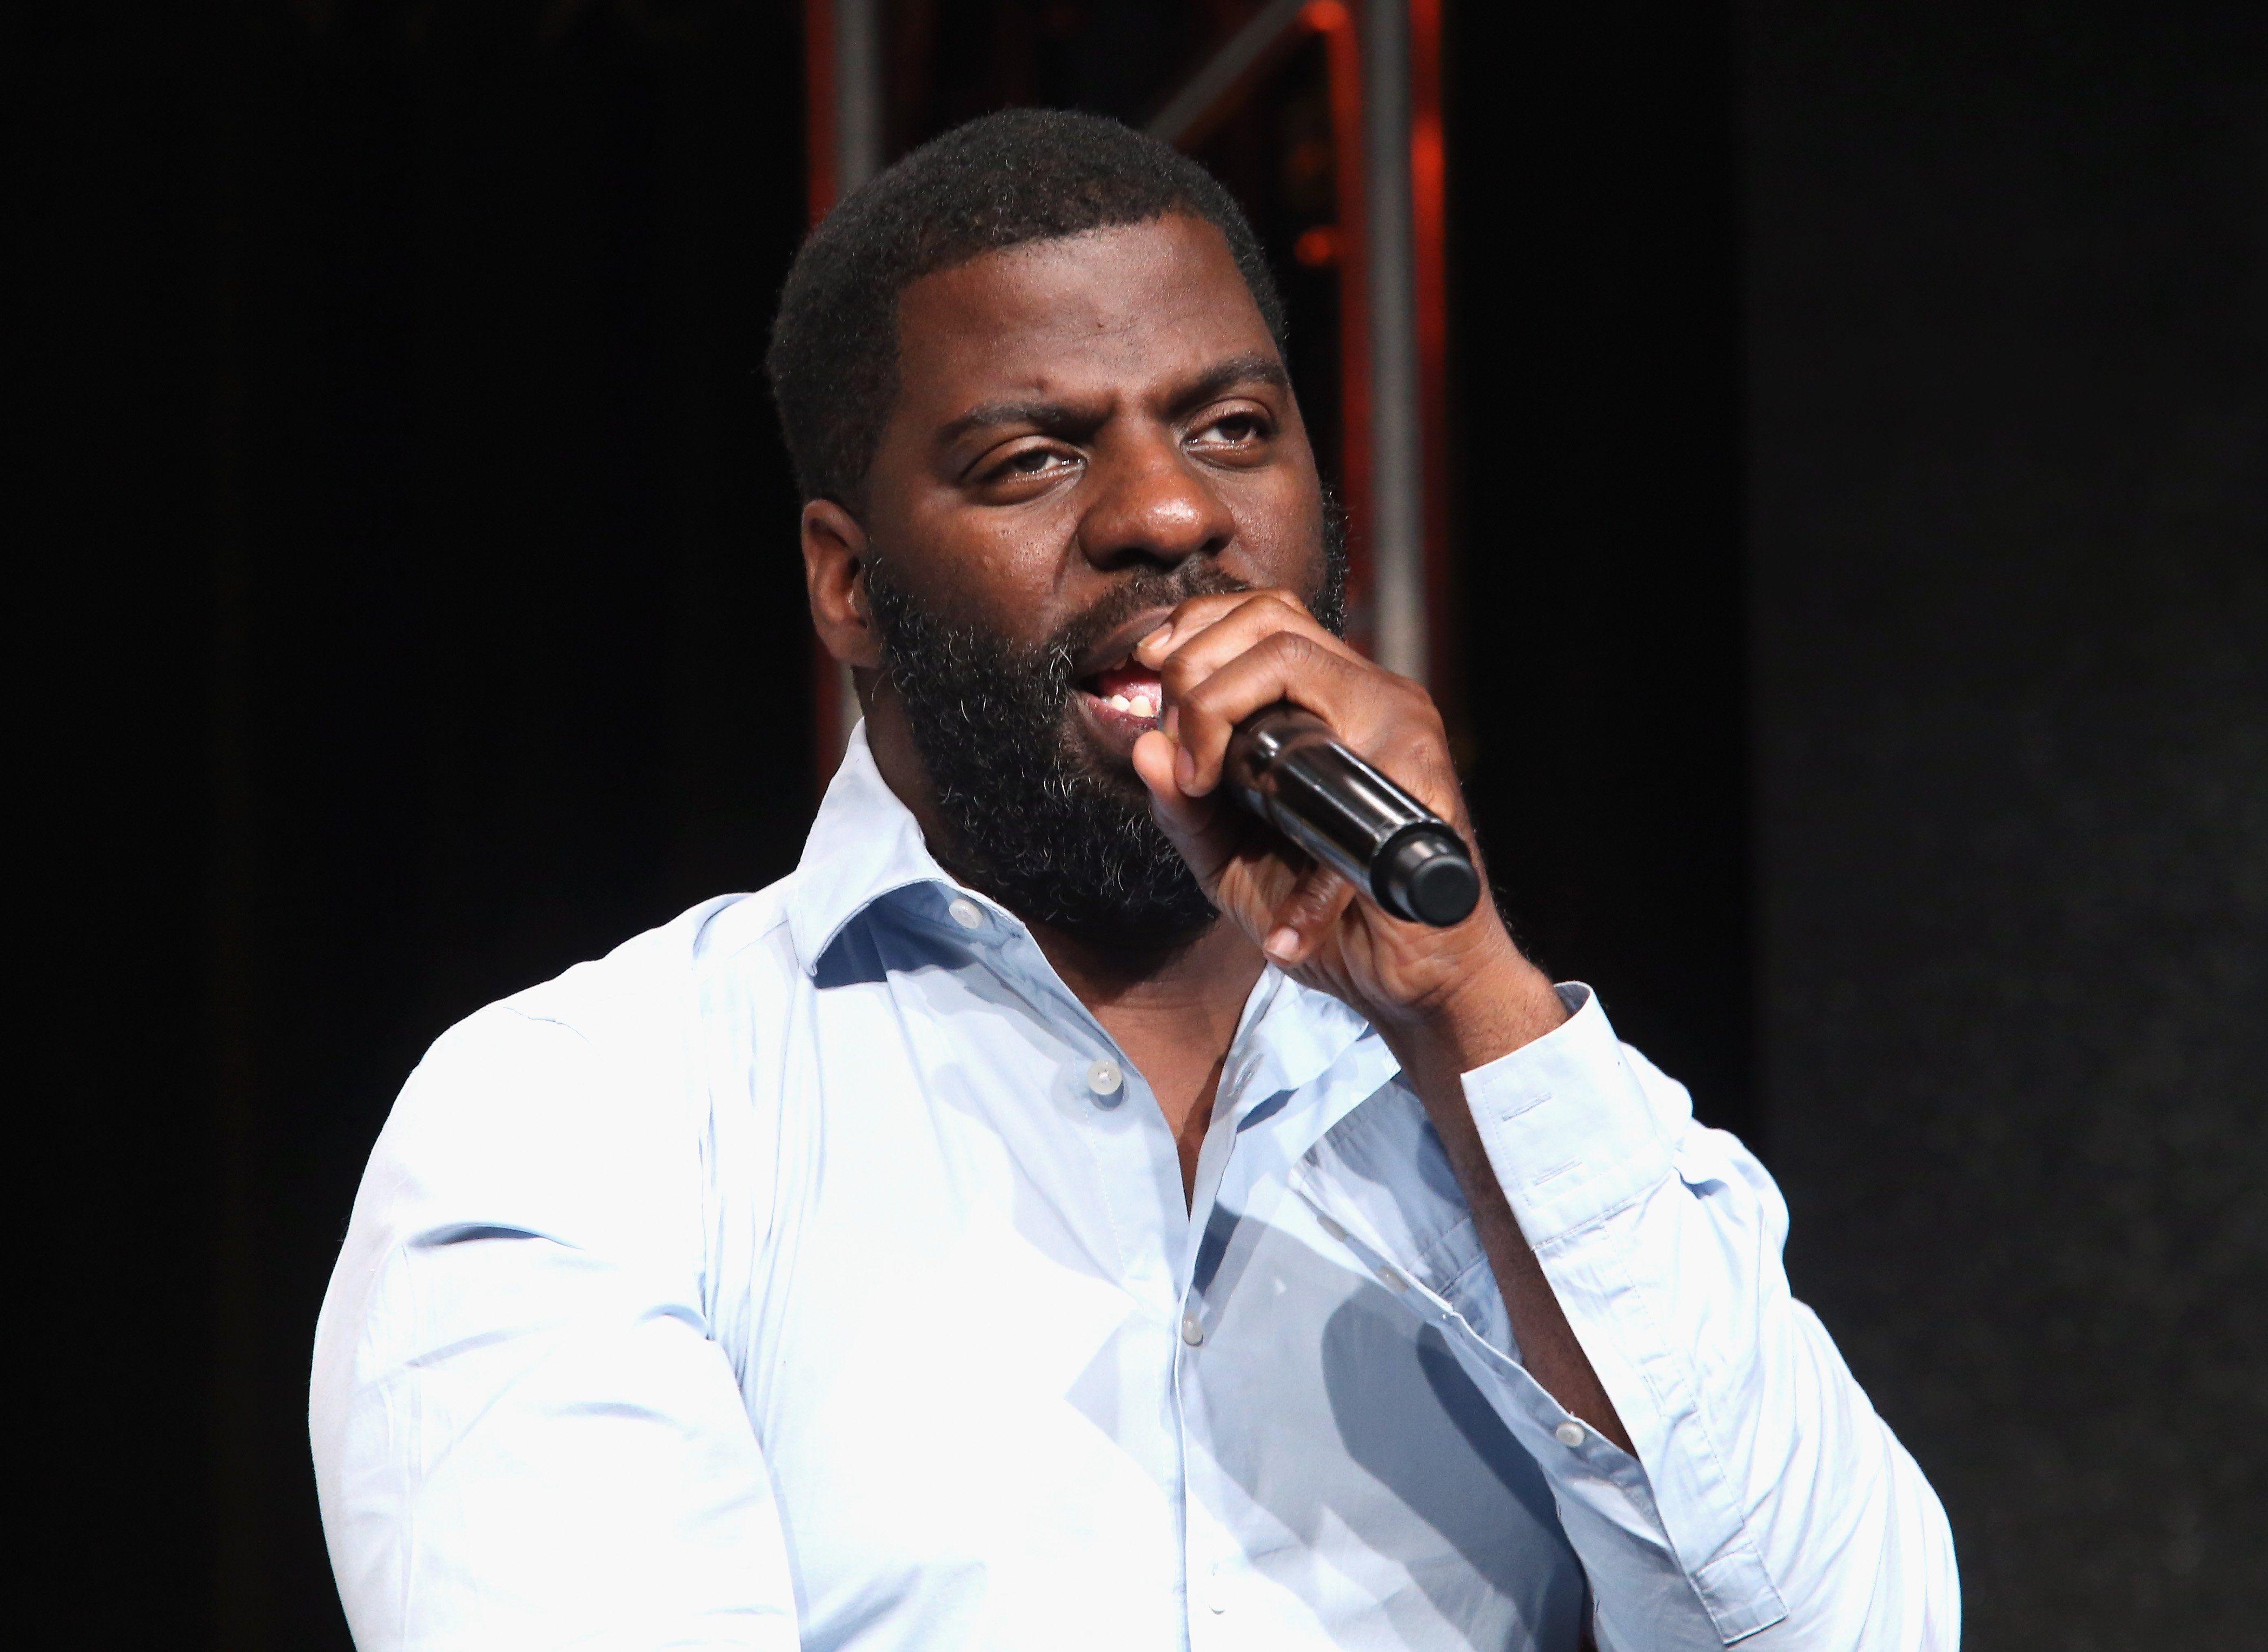 Rapper 'Rhymefest' to Trump: Come to Chicago